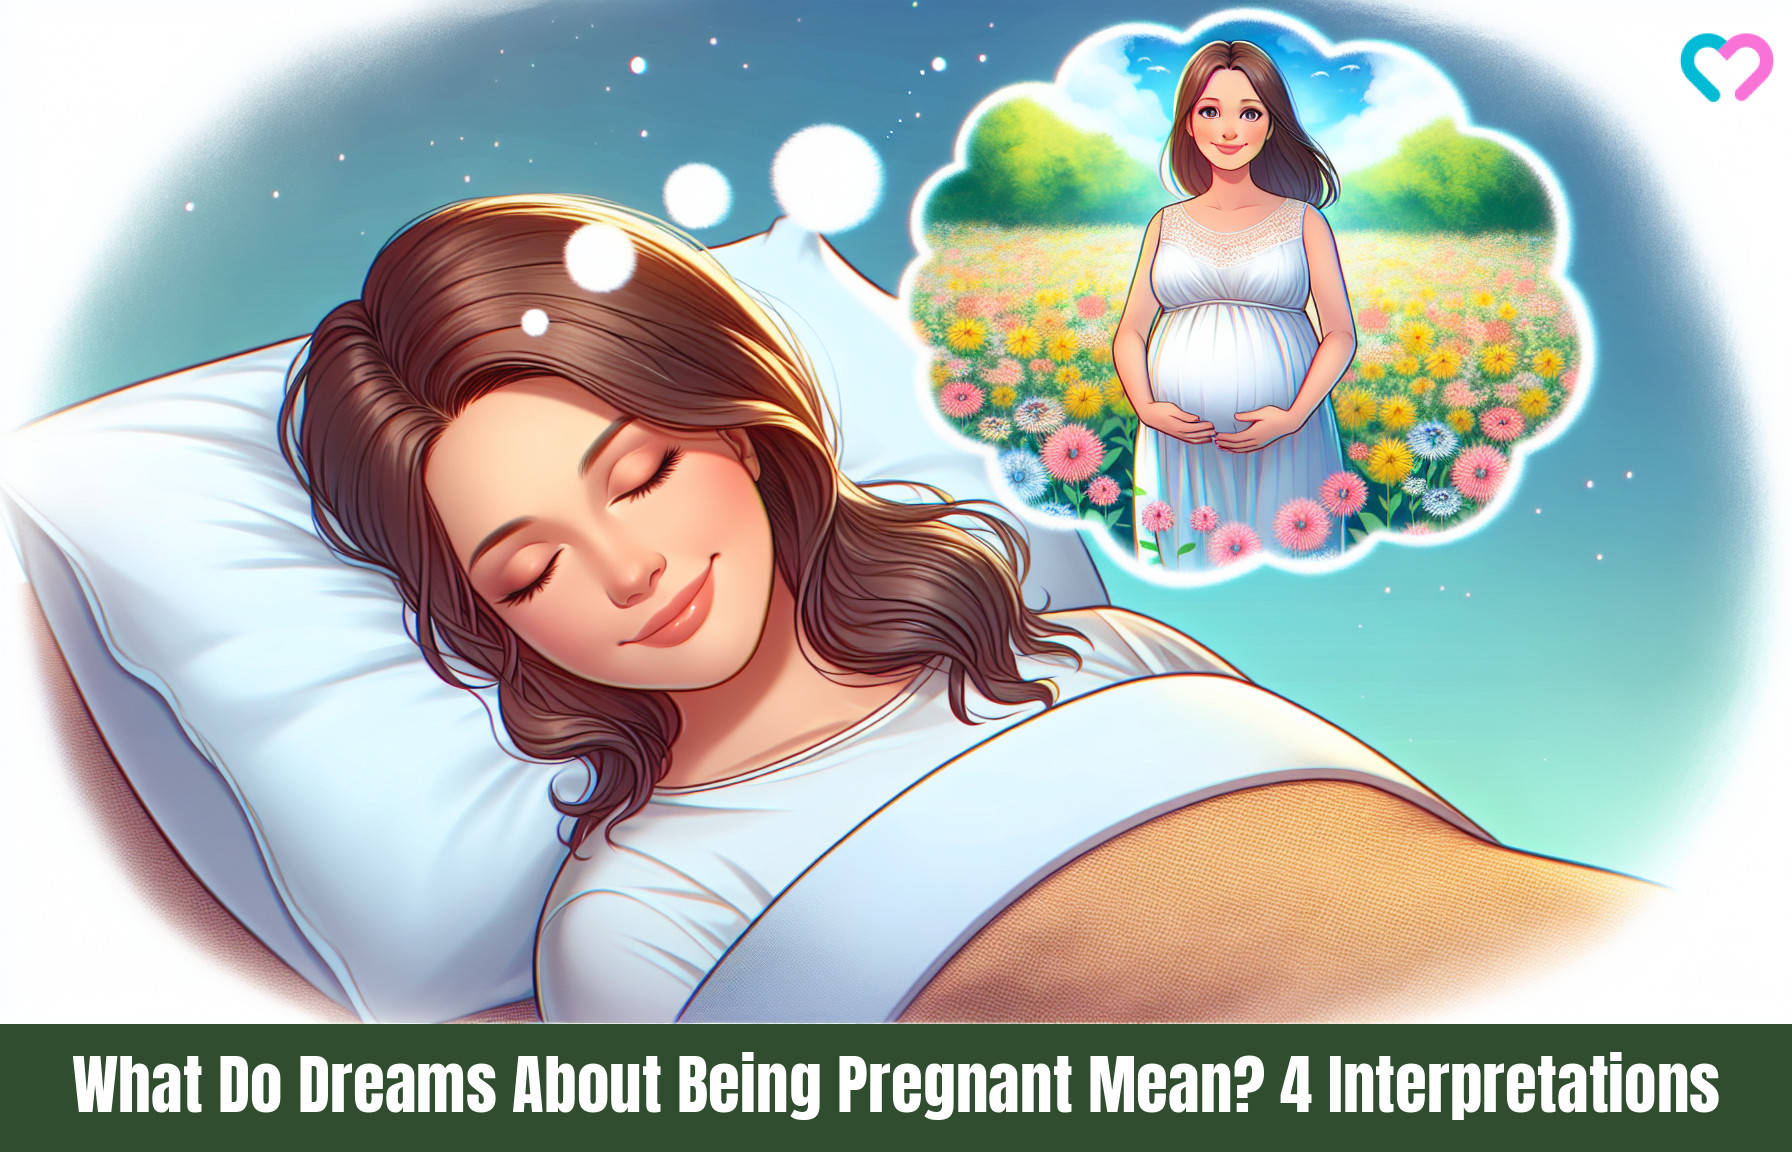 dreams about being pregnant_illustration